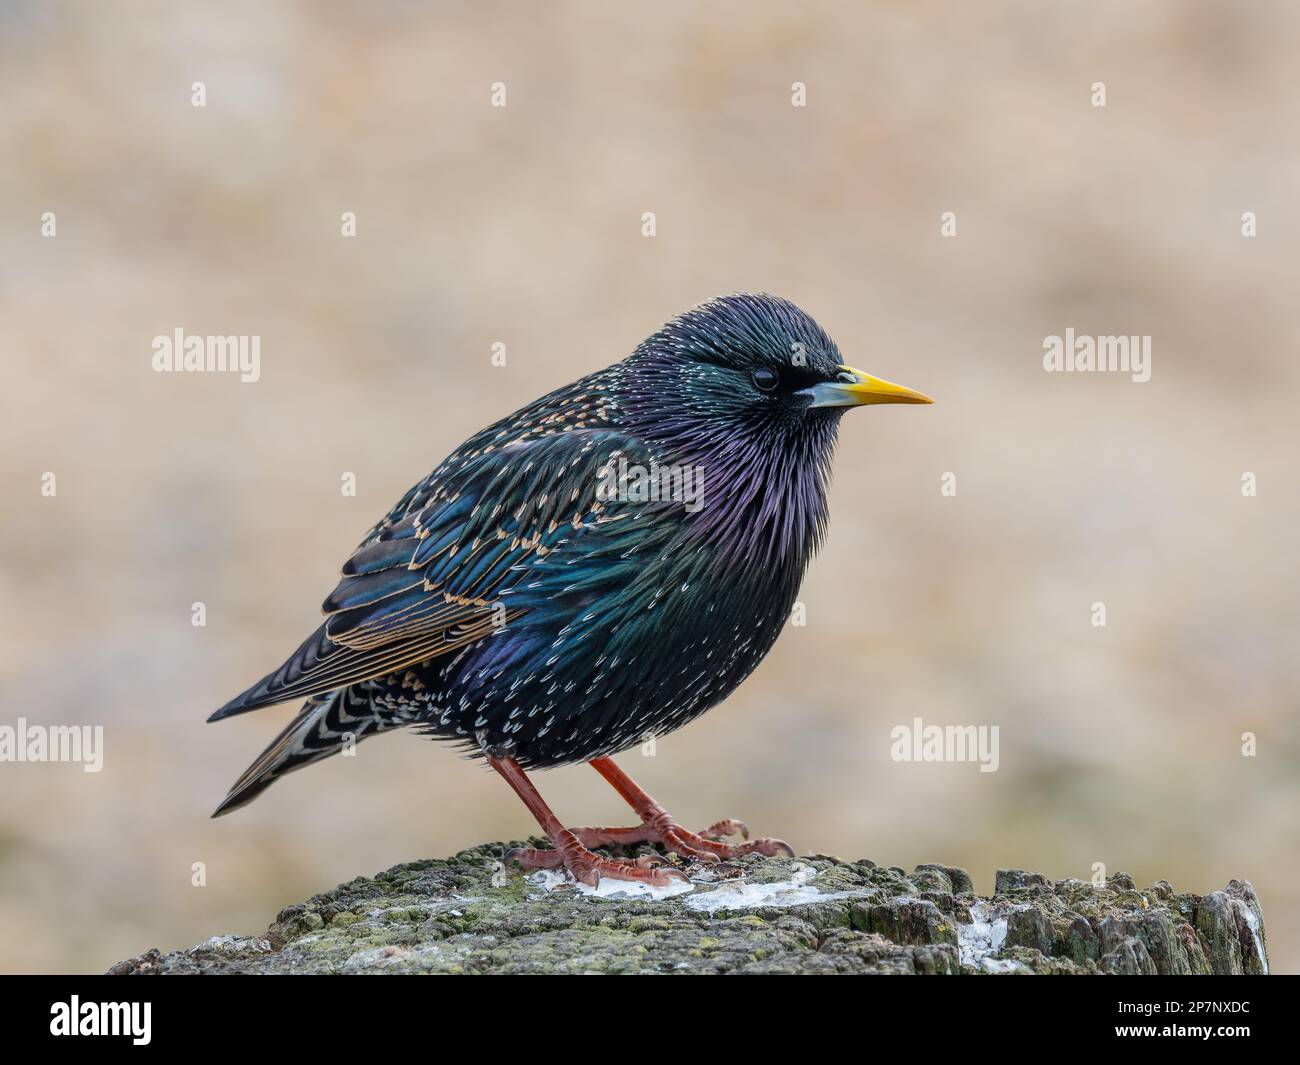 A common starling, Sturnus vulgaris, also known as the European starling in North America and simply as the starling in Great Britain and Ireland. Stock Photo